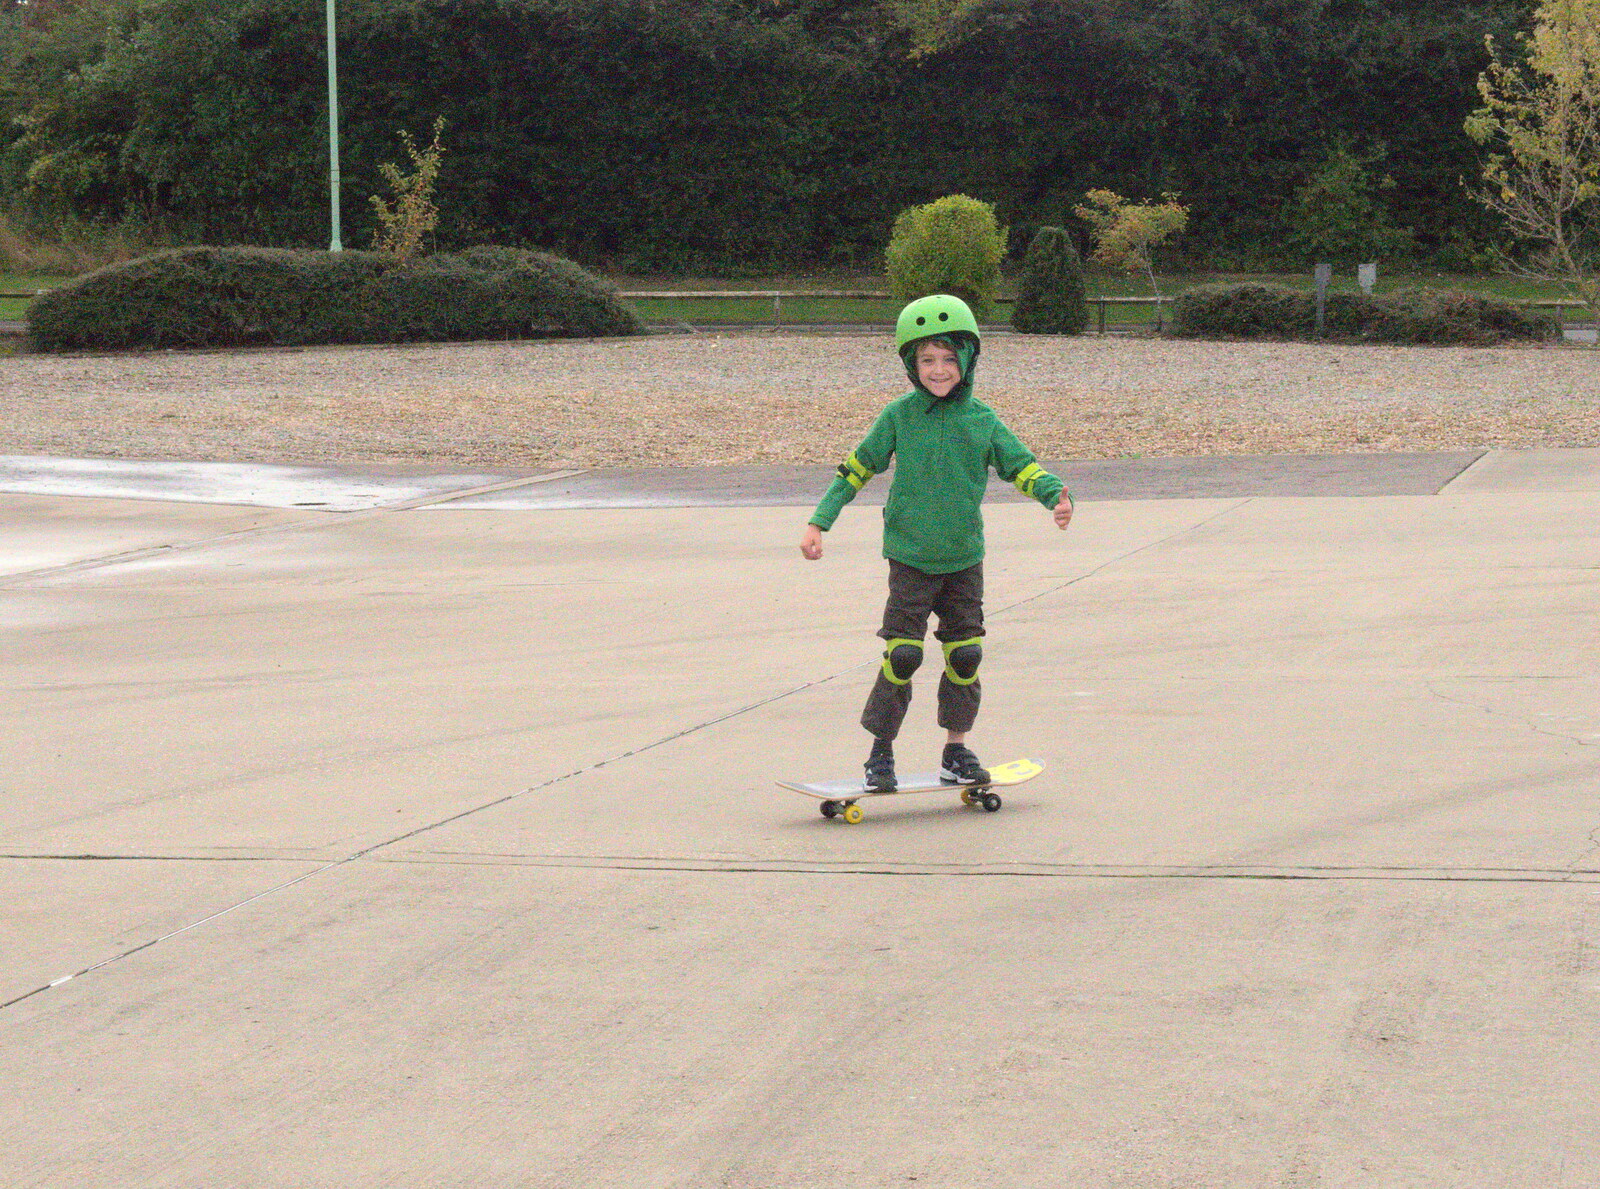 Fred on a skateboard from An October Miscellany, Suffolk - 8th October 2016